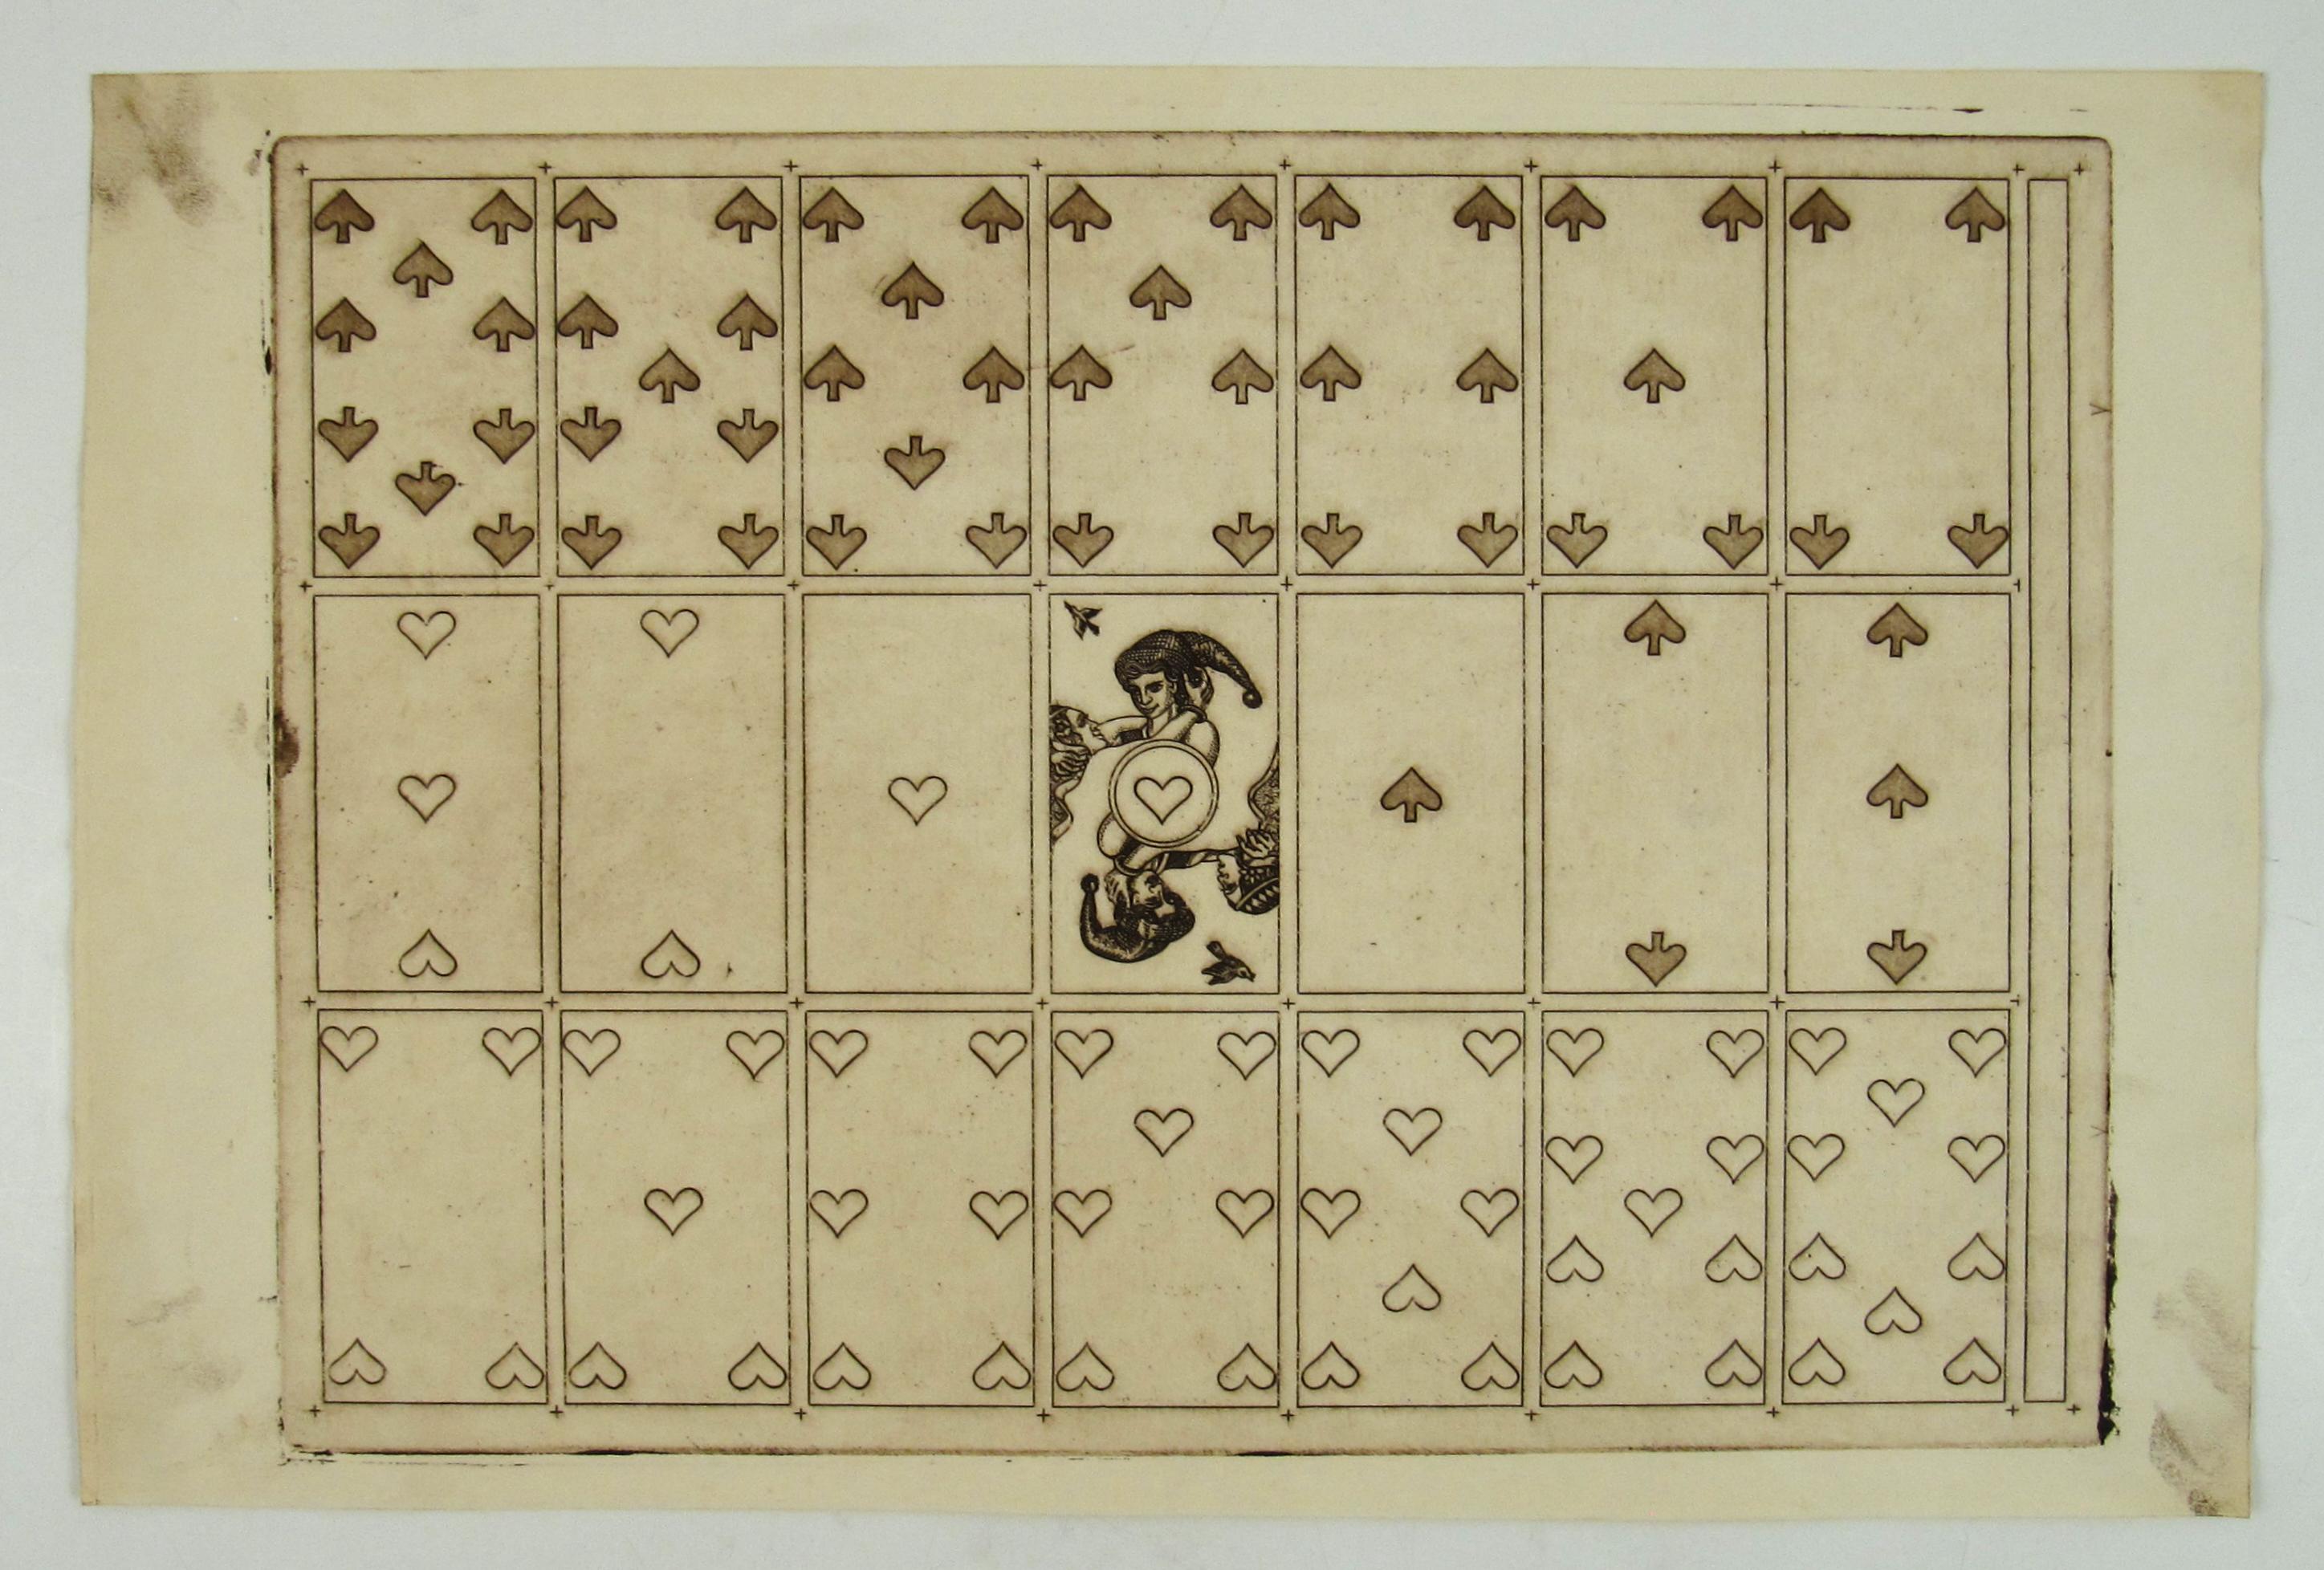 Merry Andrew No. 30, 1989 by Karl Gerich of Bath - Two Playing Card Print Sheets - Brown Figurative Print by Karl Alexander Gerich